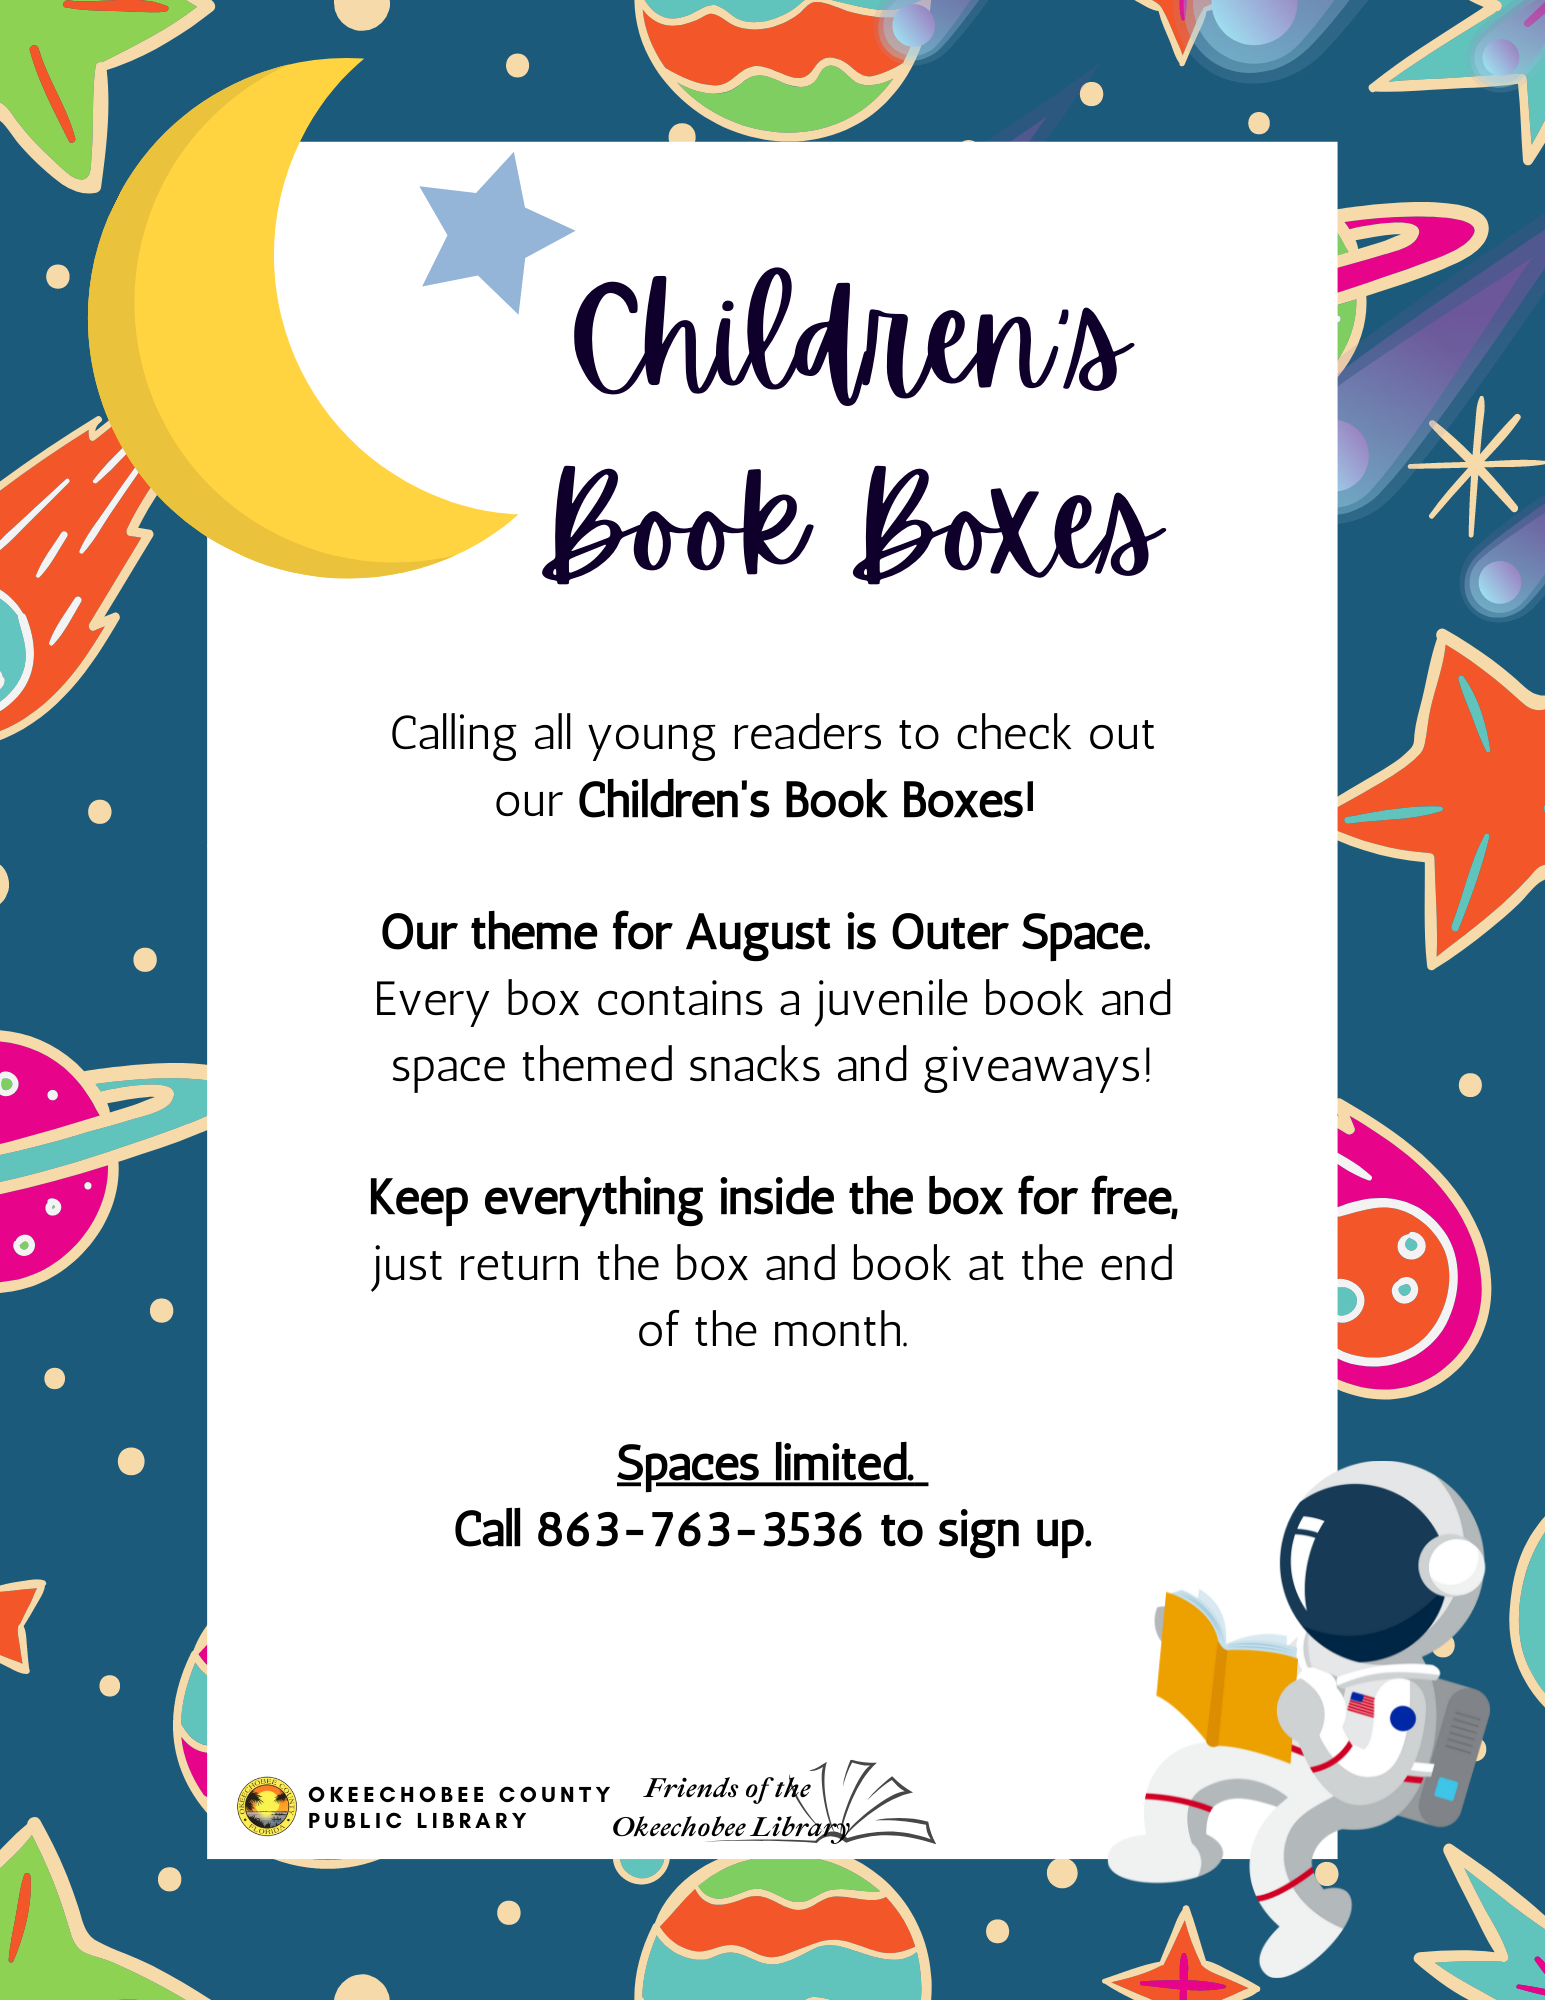  "Don't forget to sign up for the August Children's Book Boxes! Every box contains a juvenile book and space themed snacks and giveaways! SPACES LIMITED. To sign up, call 863-763-3536!"